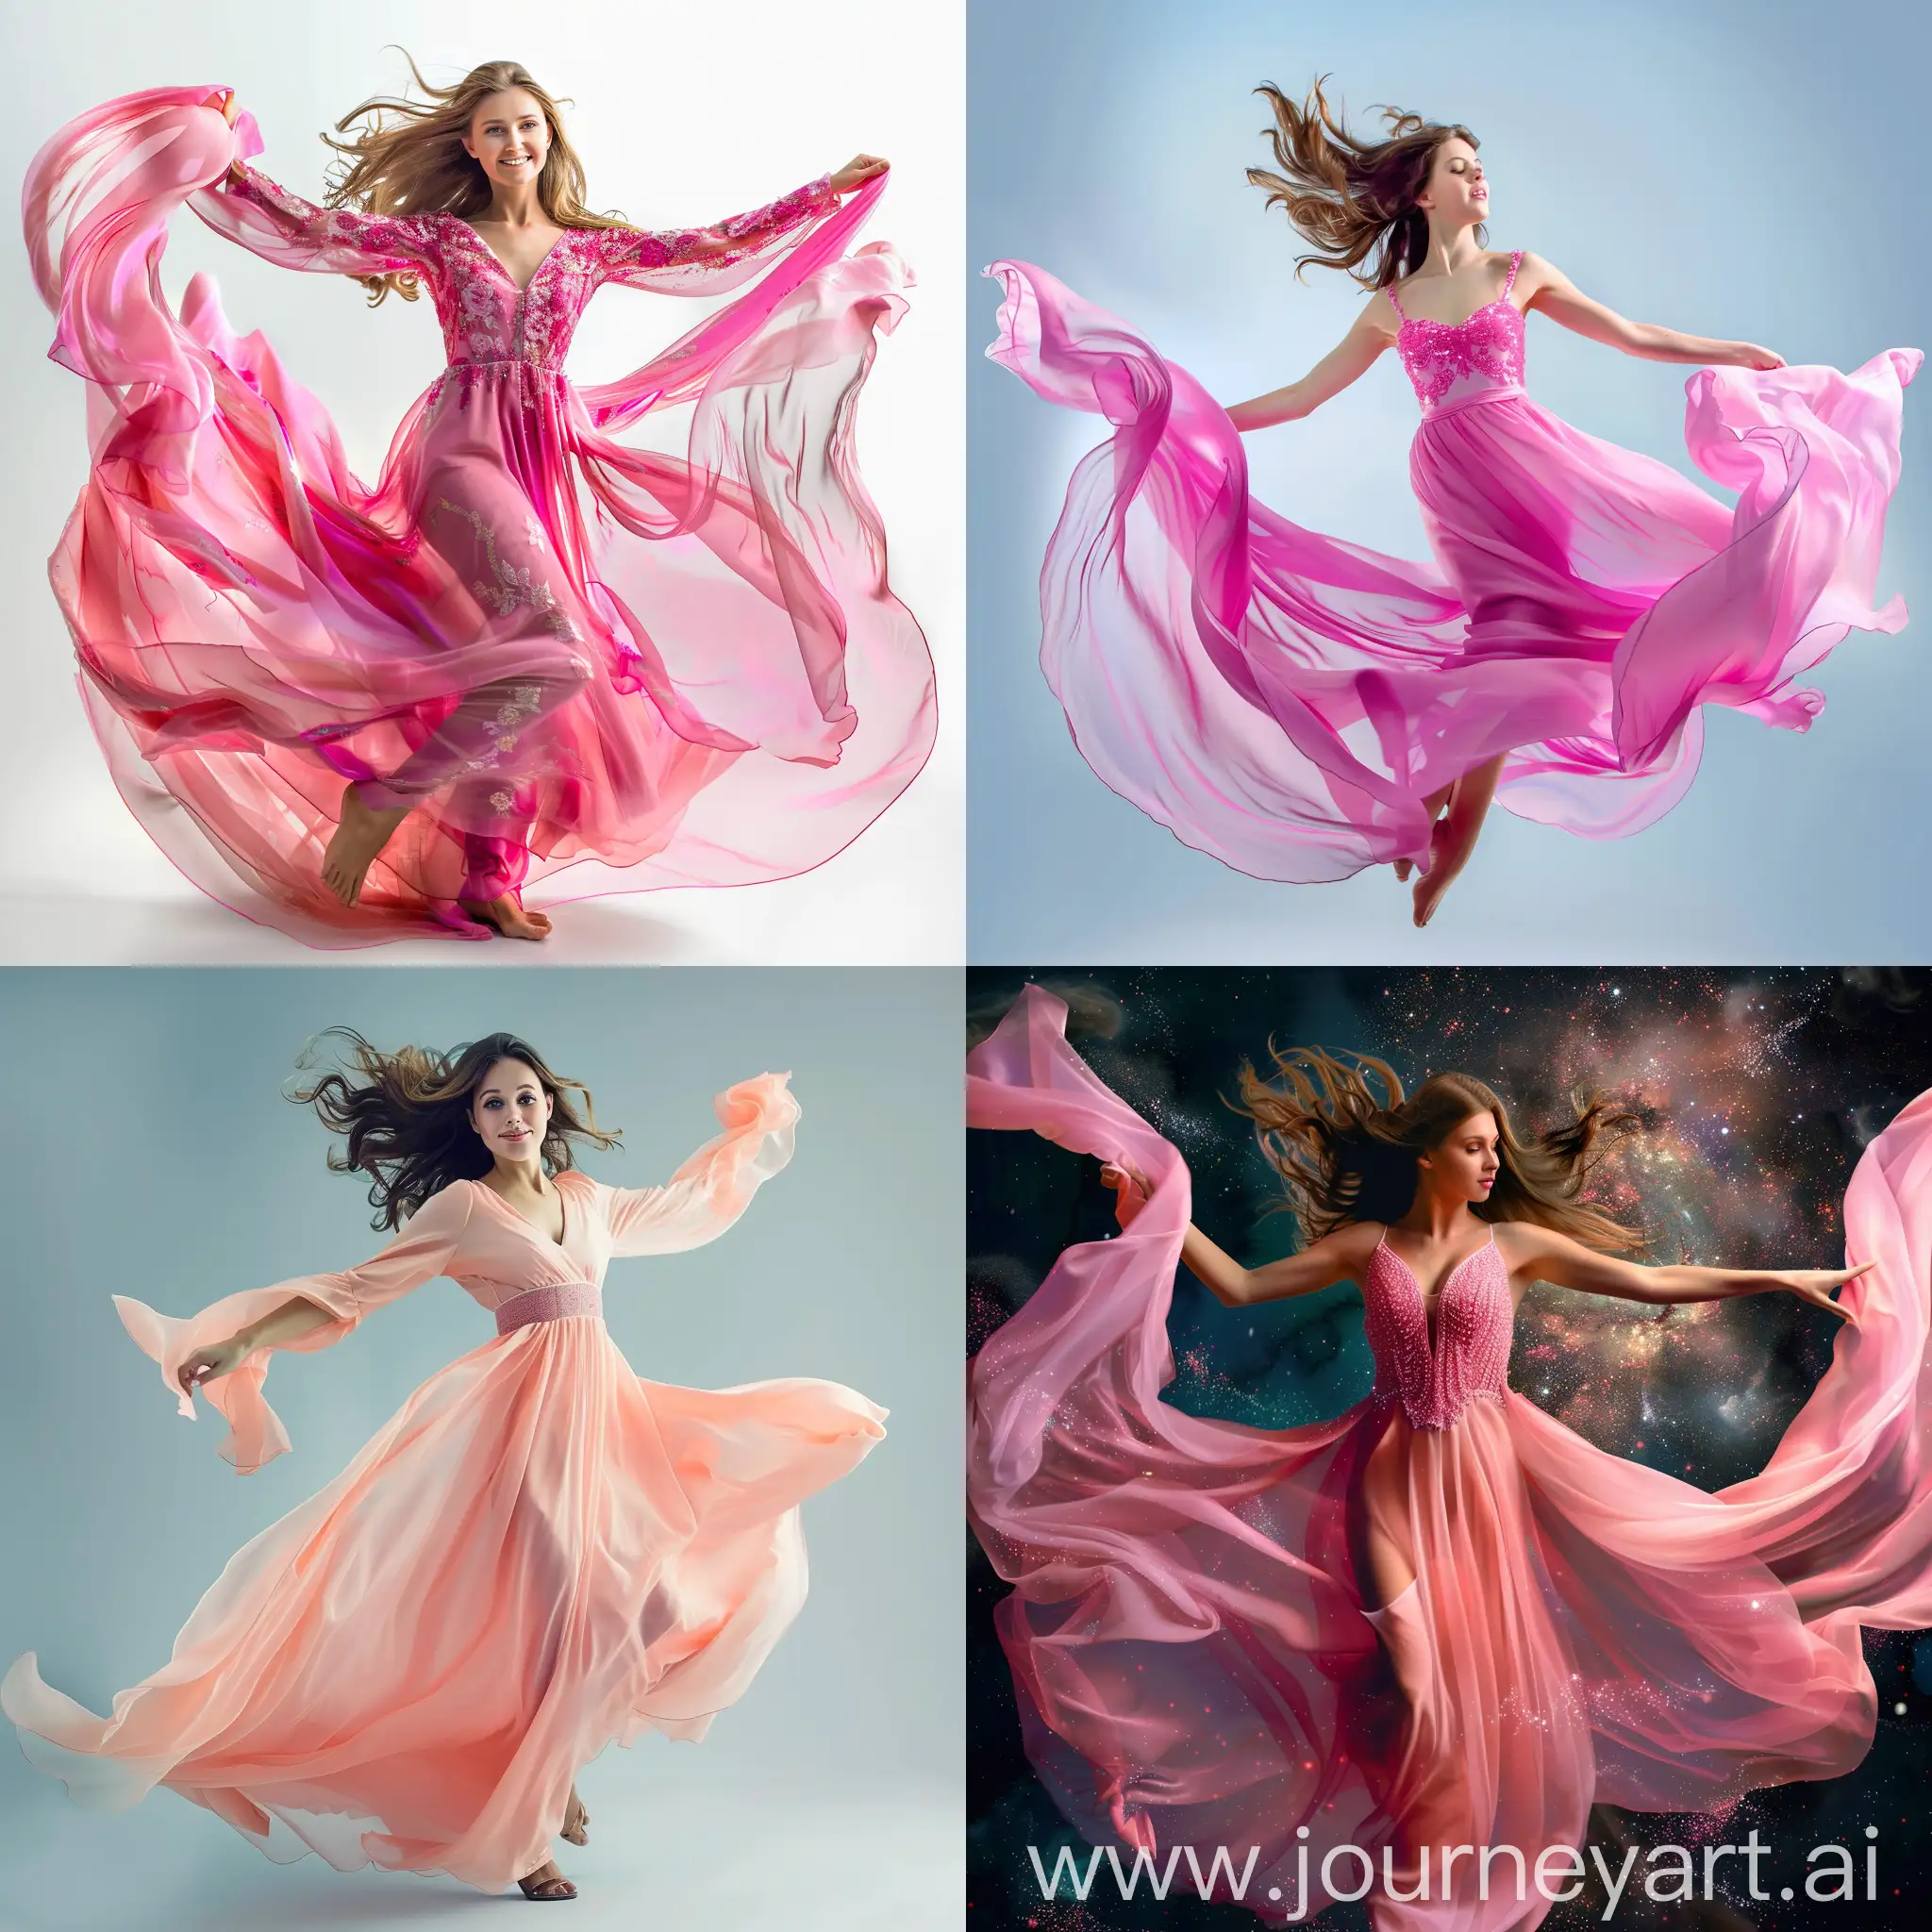 full shot of Woman Beauty Fashion Dress, Girl In Flying pink Fluttering Gown stock photo